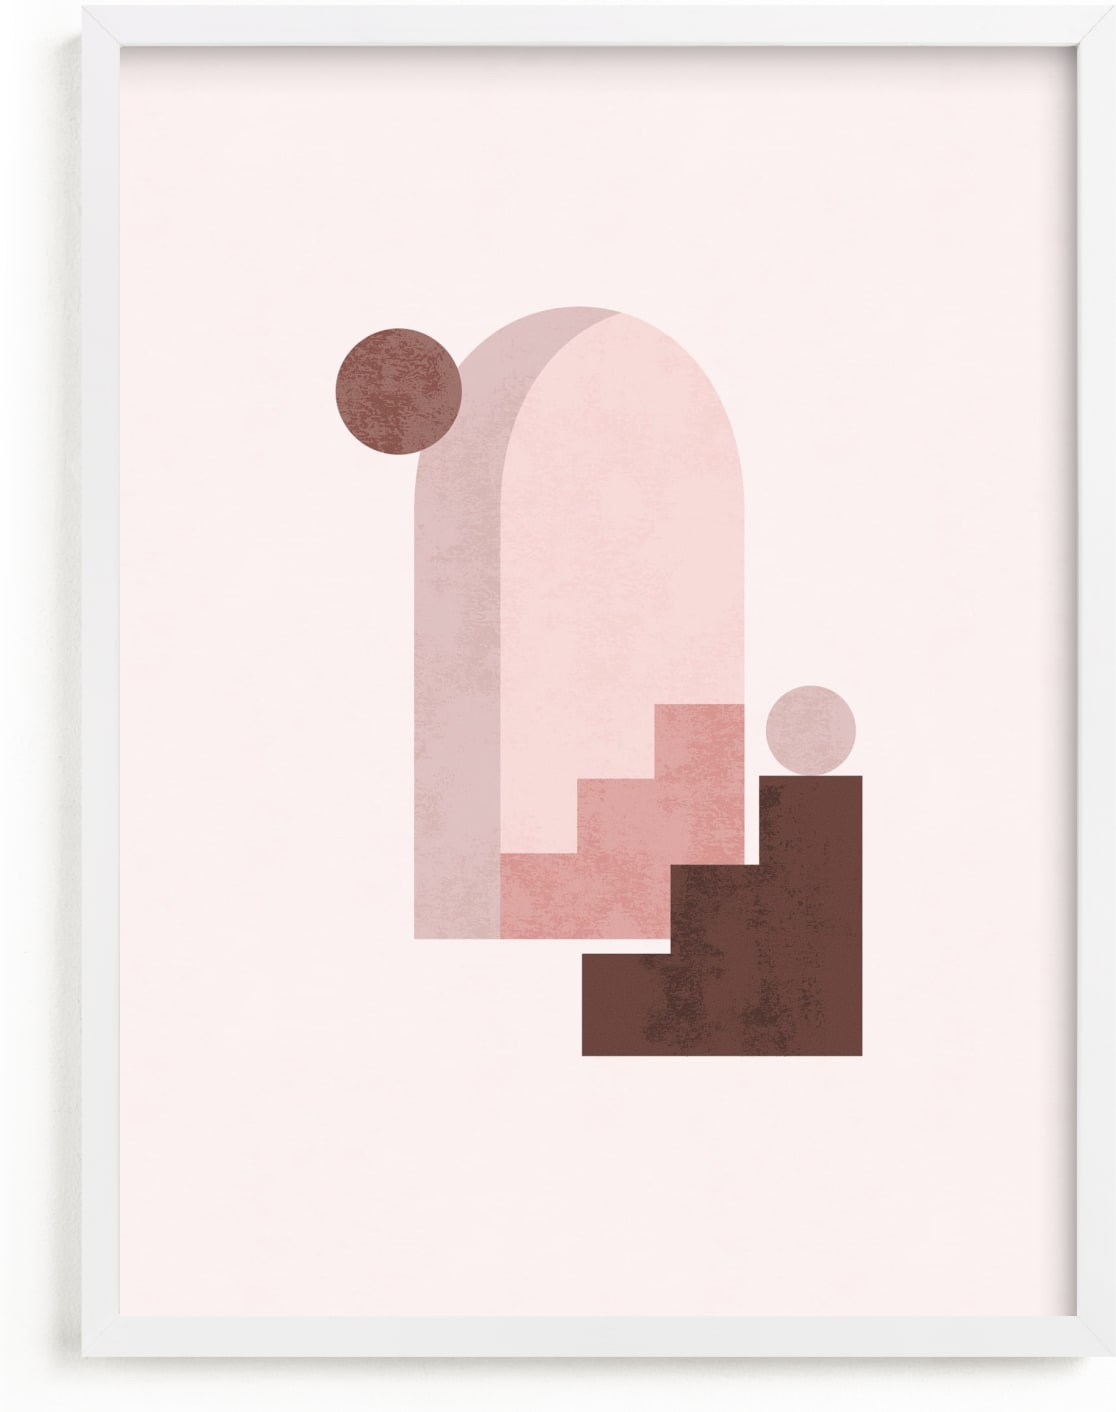 This is a pink art by Iveta Angelova called Rustic Geometry 1.